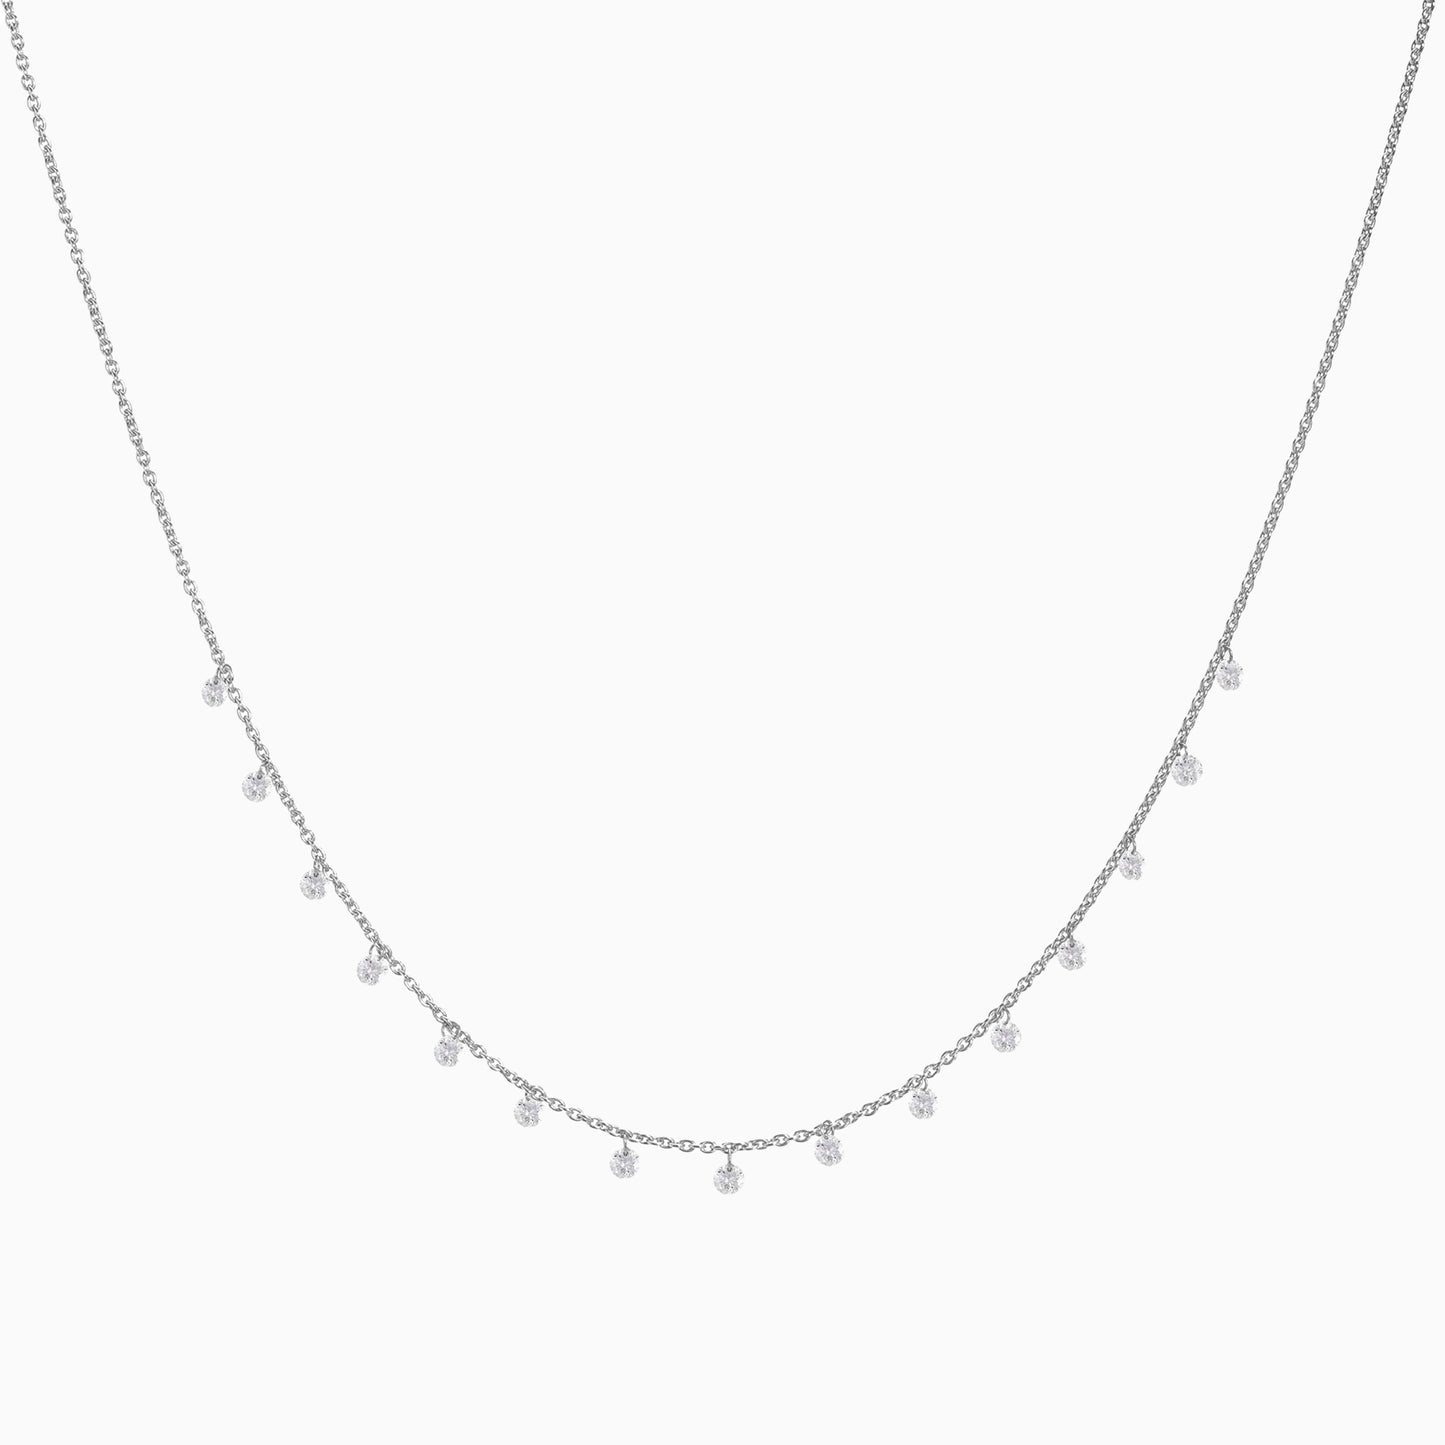 Floating Diamonds Necklace in White Gold on a white background